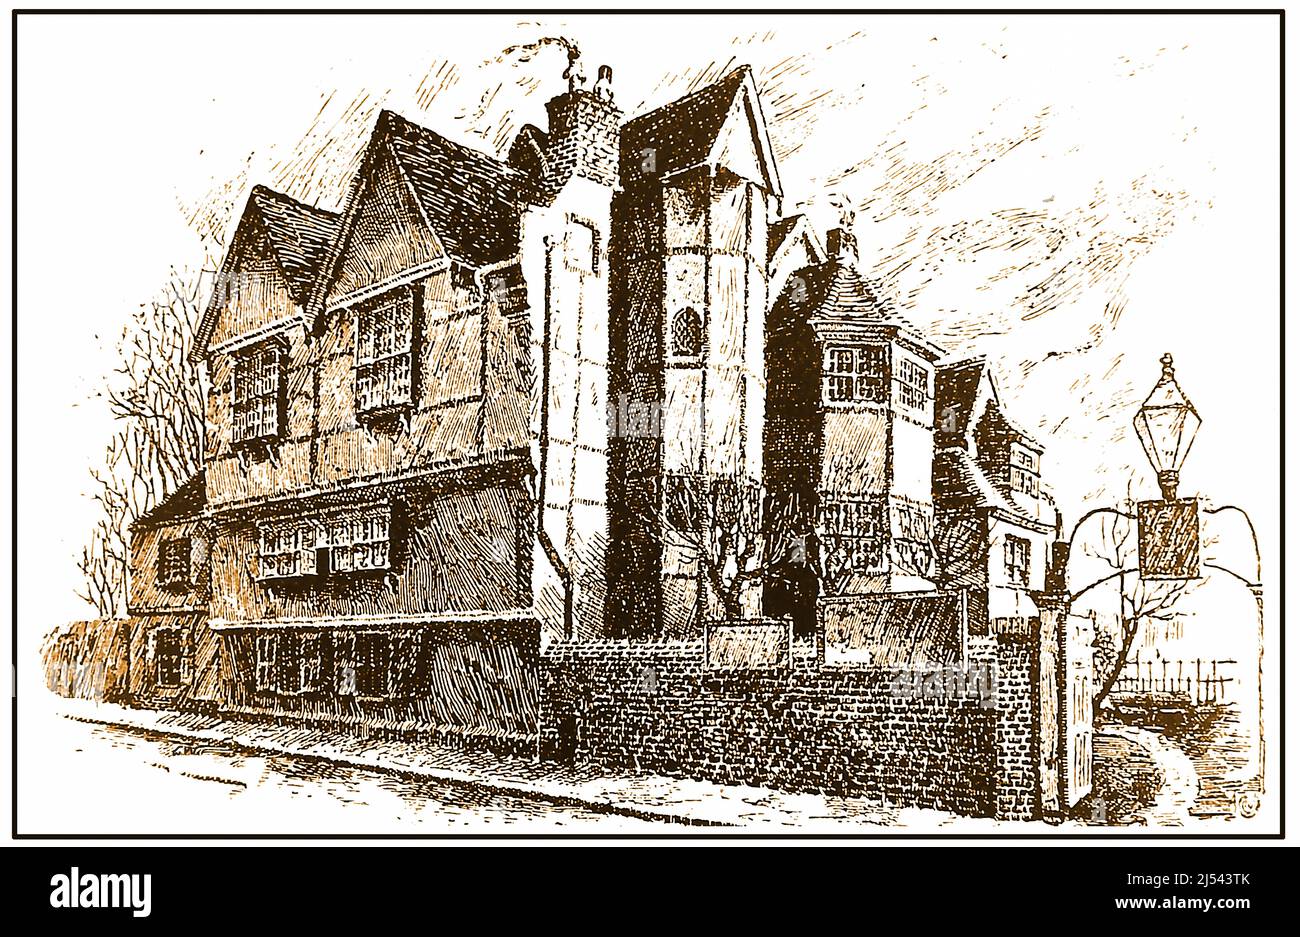 An old 19th century sketch of Eastgate House, Rochester, UK. . it is   Grade I listed Elizabethan townhouse associated with with author Charles Dickens who featured it as as Westgate in The Pickwick Papers. He also featured it as the Nun's House in The Mystery of Edwin Drood.  The house has a Swiss style chalet in its grounds  where Dickens wrote several of his novels. It now serves as a Dickens museum. Stock Photo